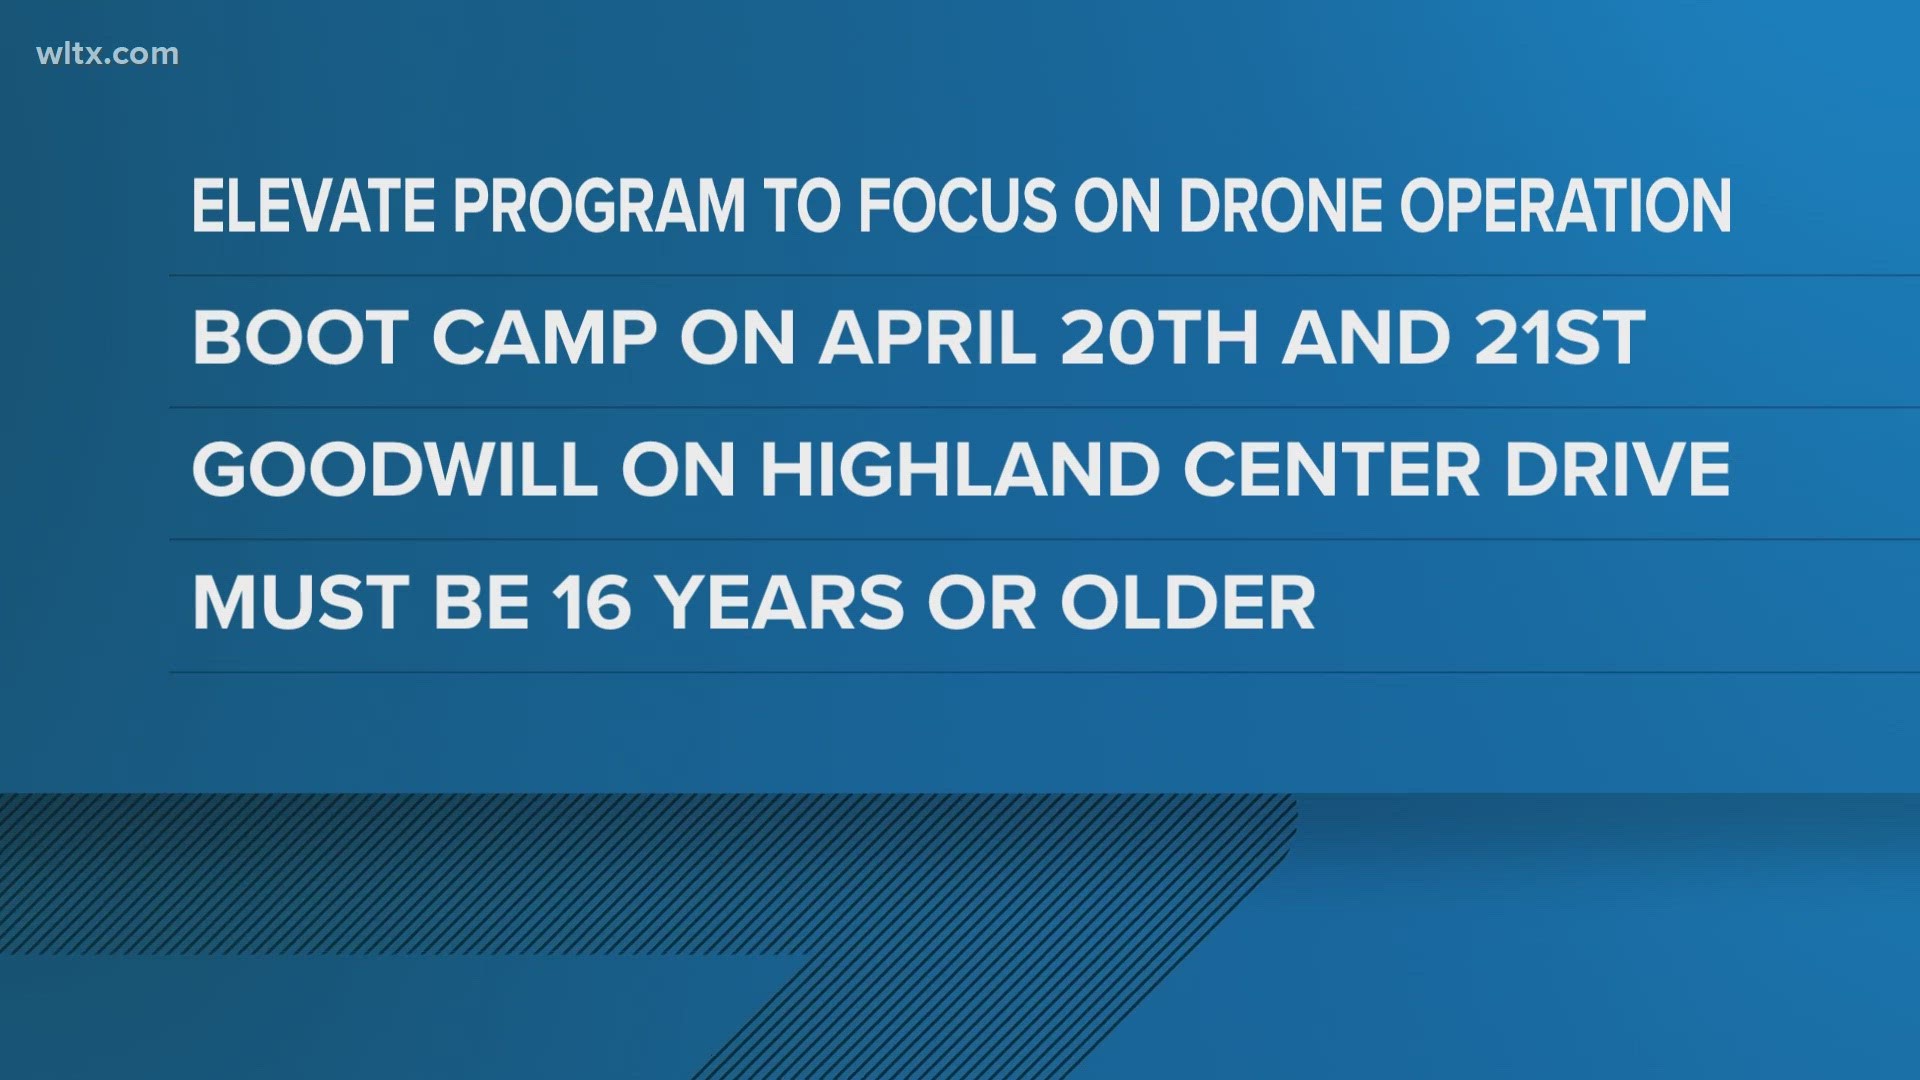 The elevate program will focus on drone operation, safety and preparing participants for the FAA 107 exam.